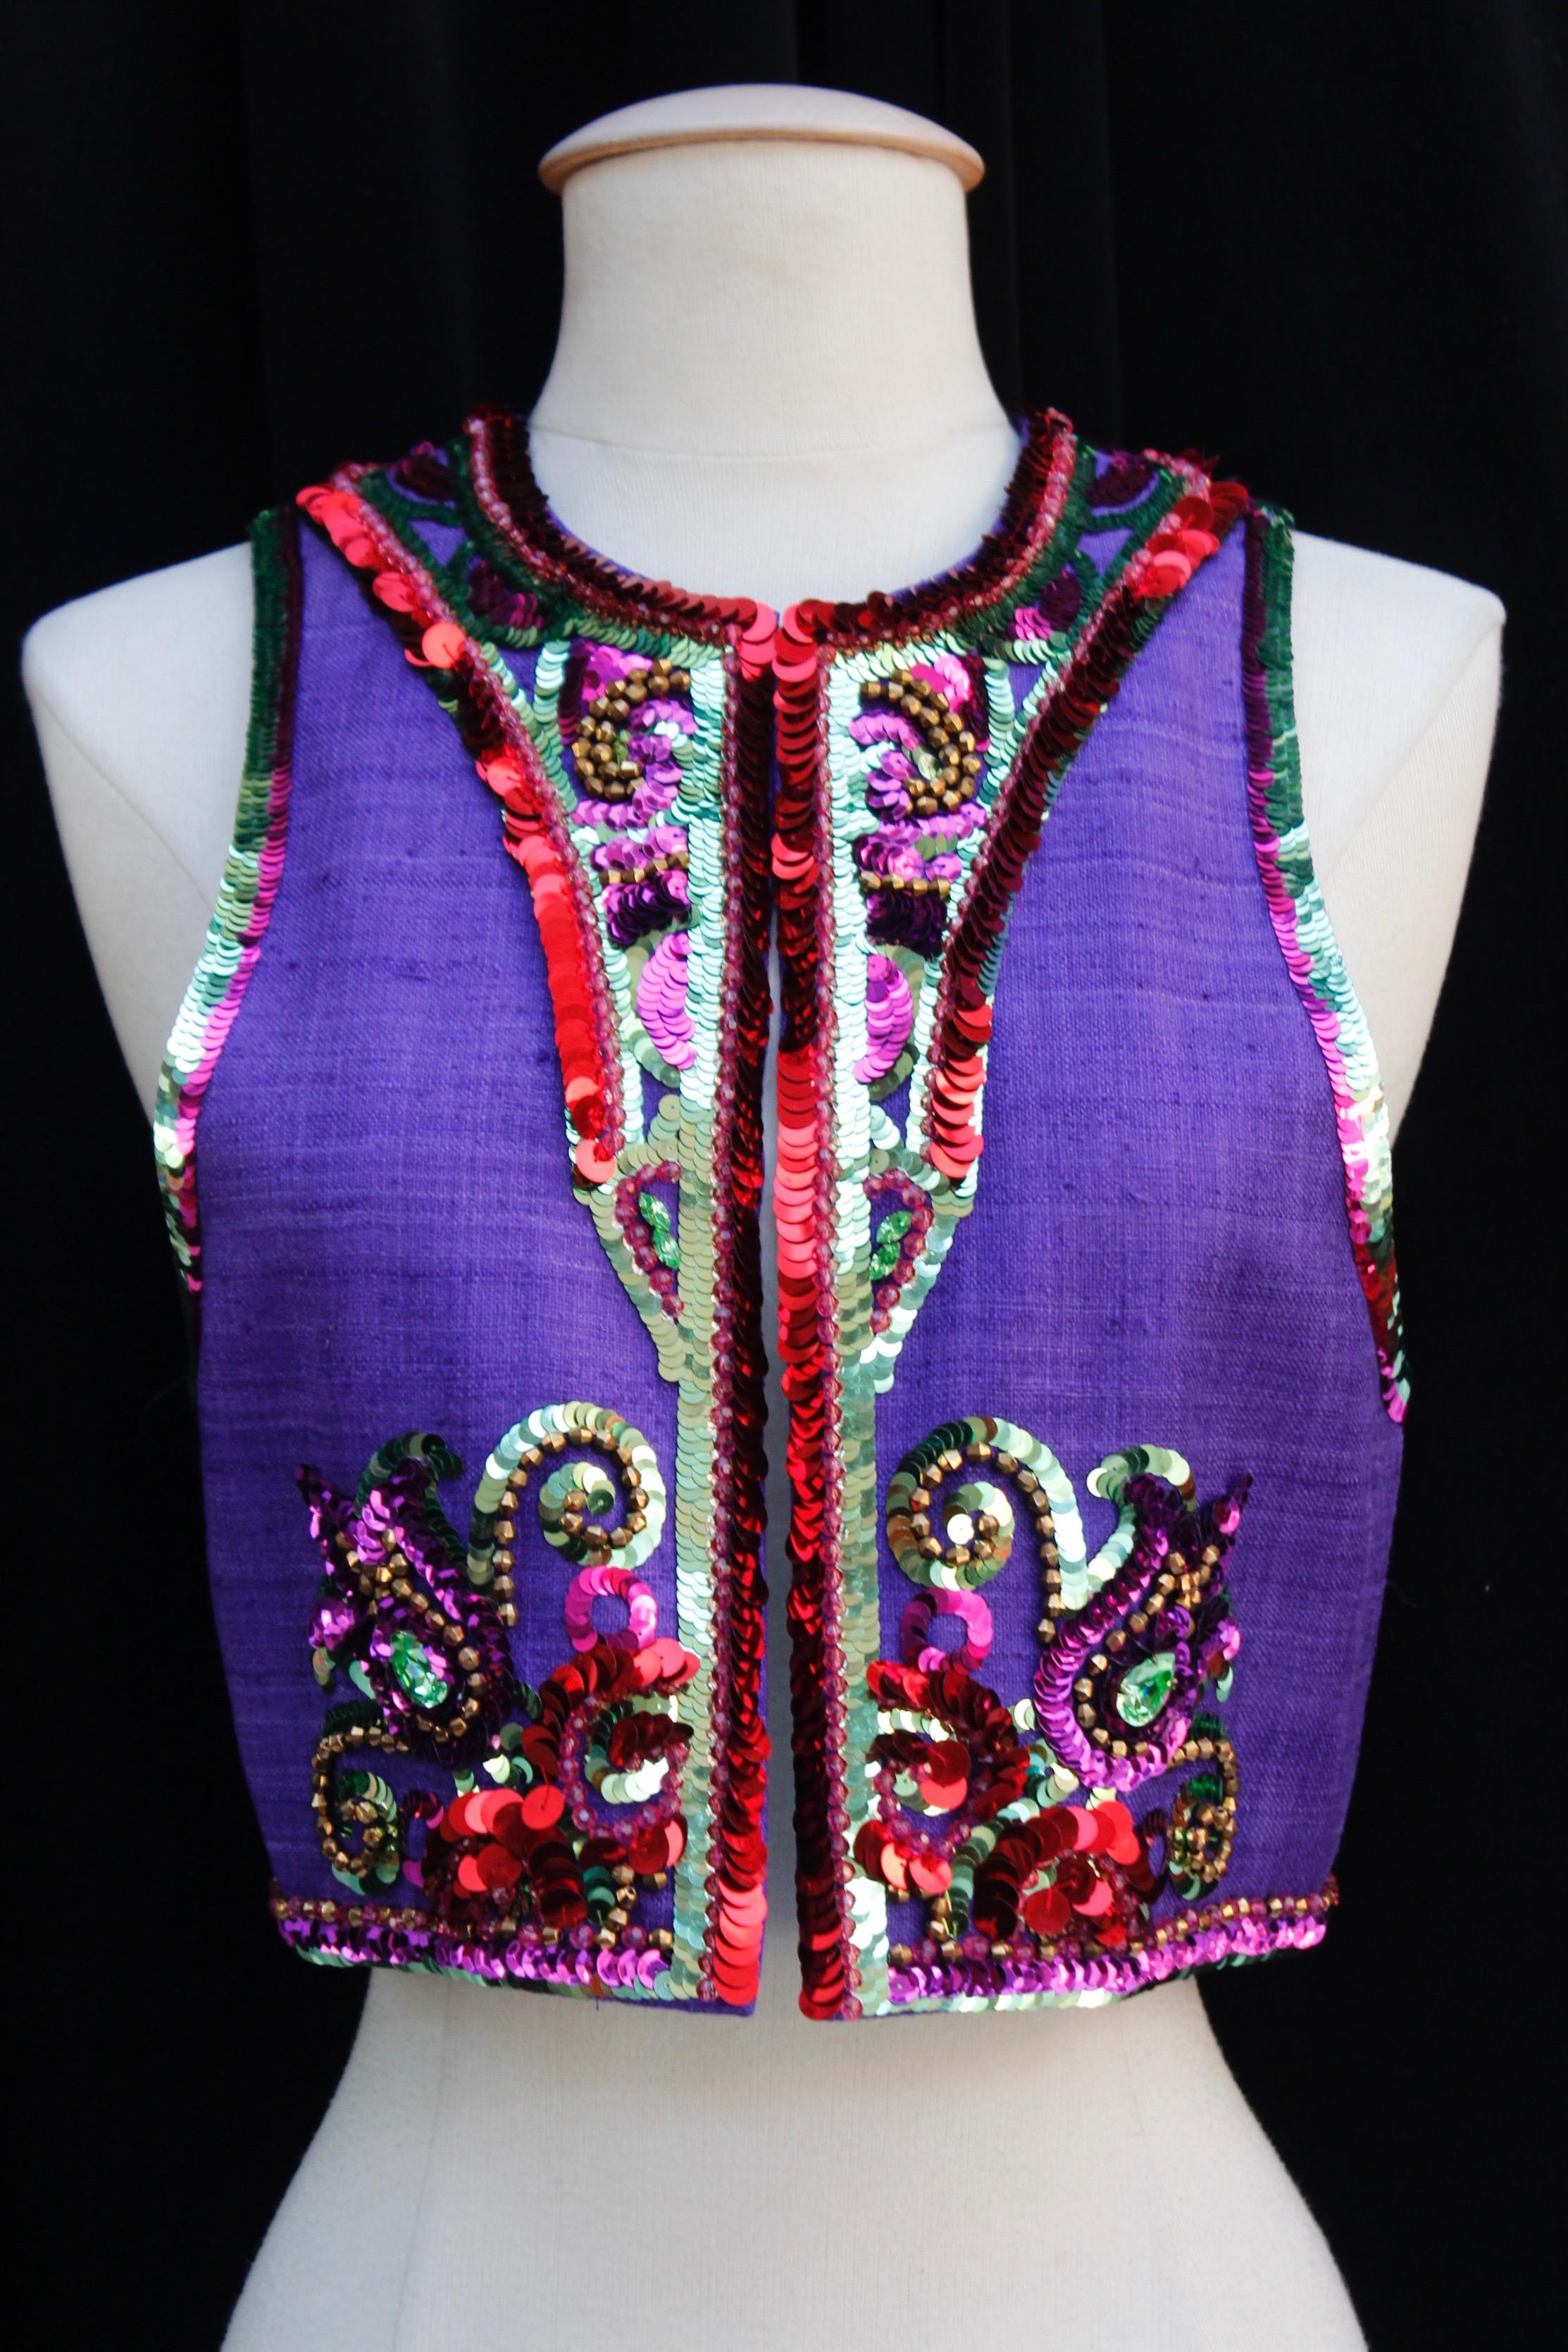 YVES SAINT LAURENT Rive gauche (Made in France) Gorgeous sleeveless bolero composed of raw silk, embroidered with sequins, faceted beads and rhinestones in pink, red, purple, green and gold colors, arranged in arabesque and paisley patterns. Green